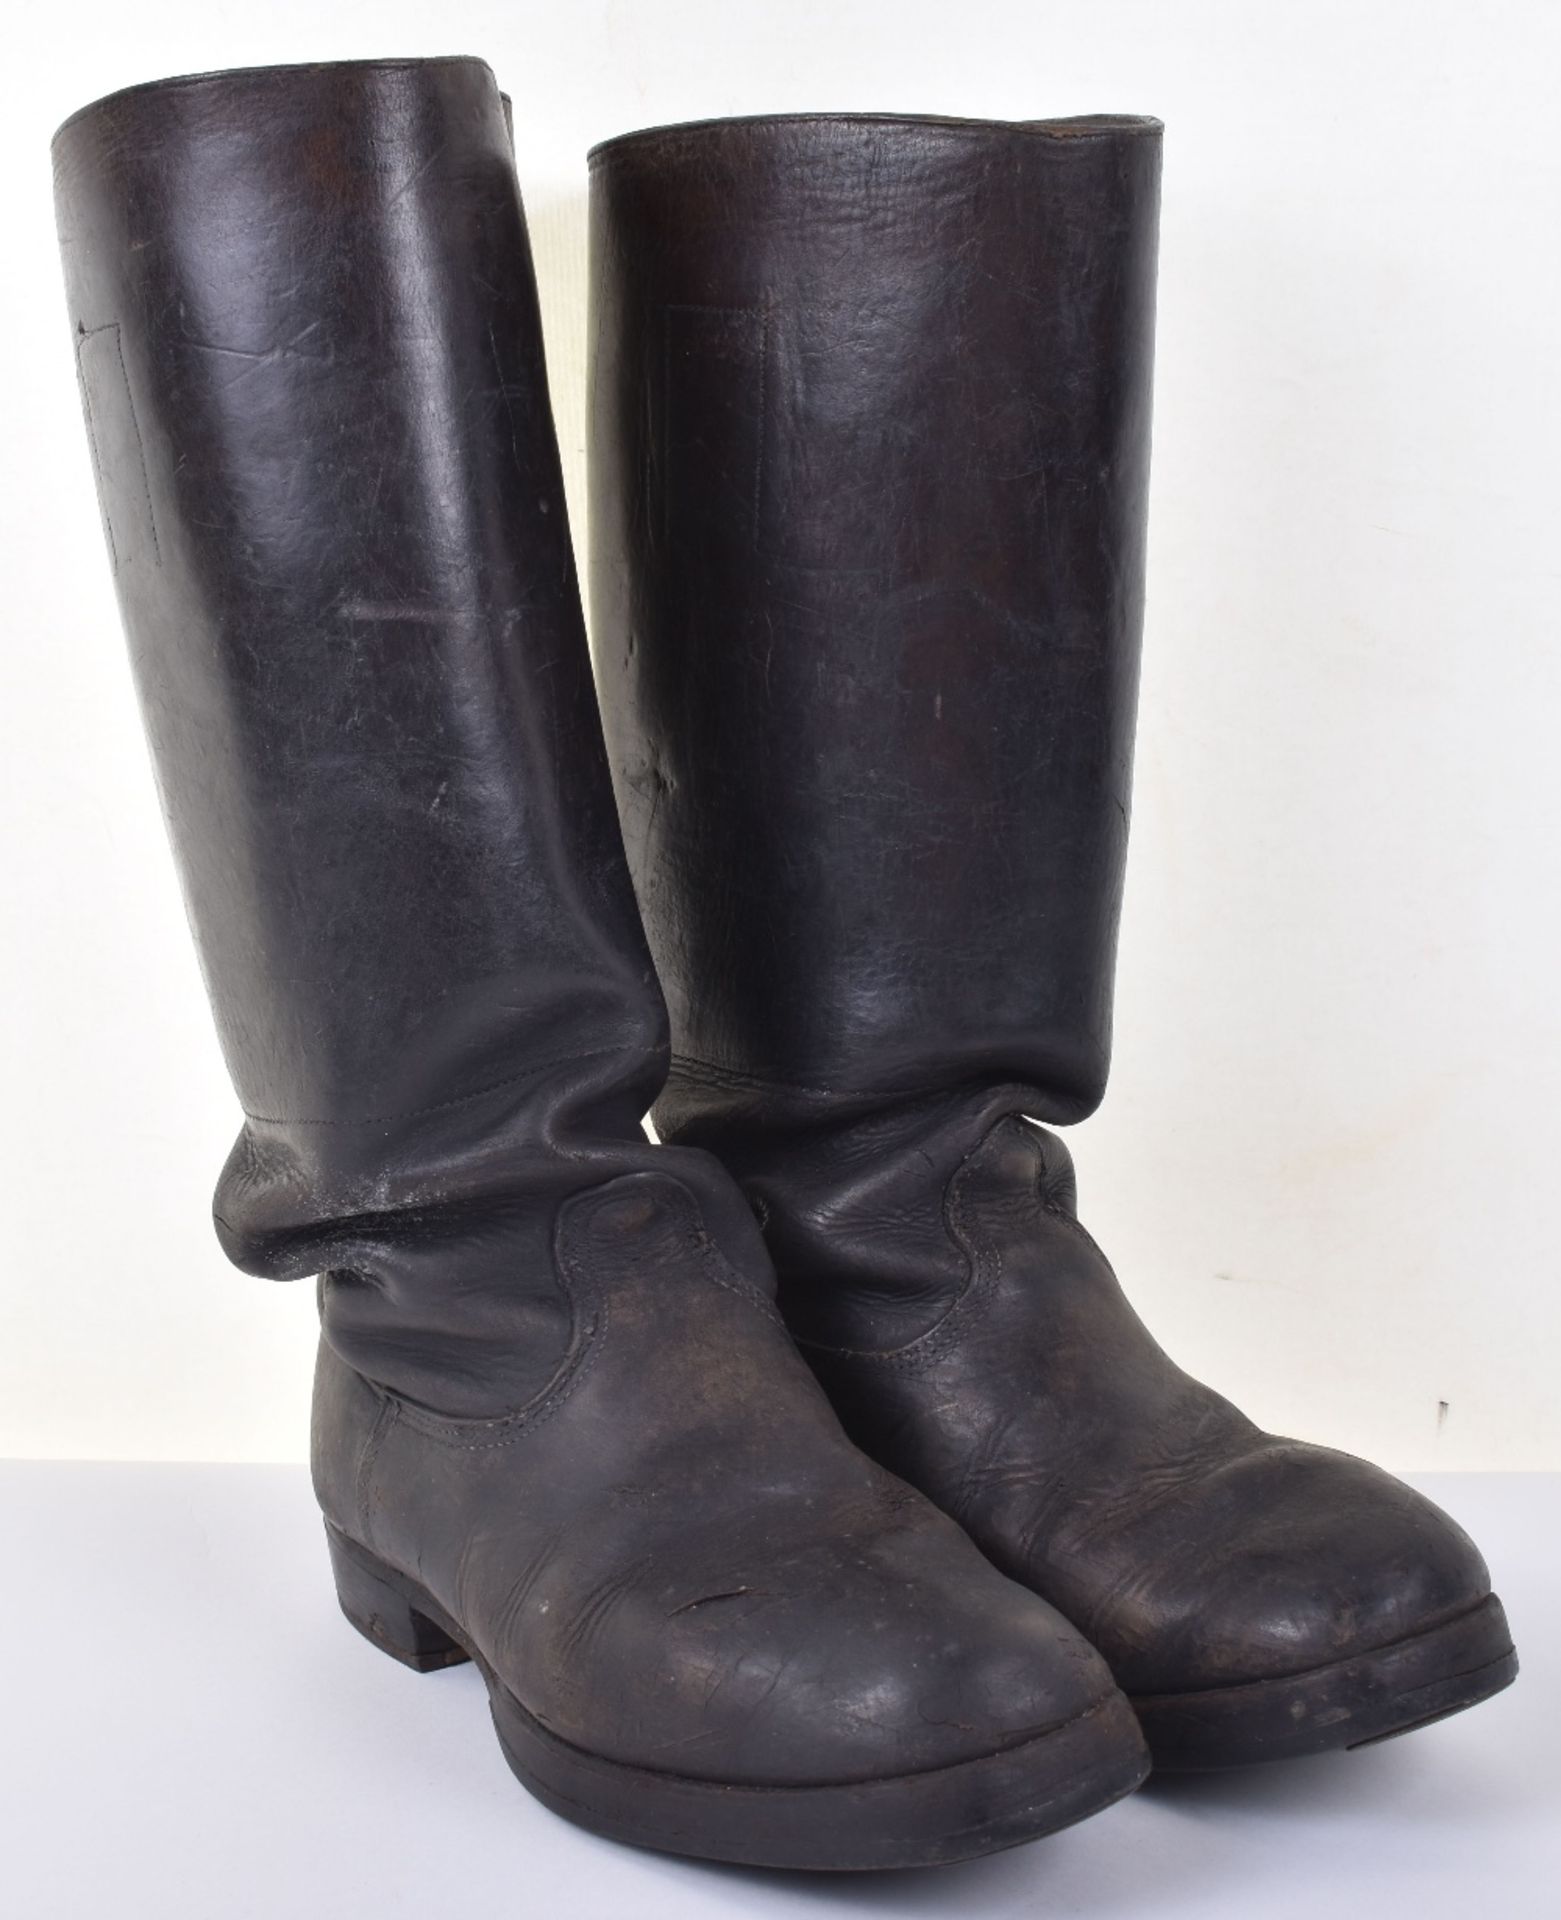 WW2 German Army Officers Jack Boots